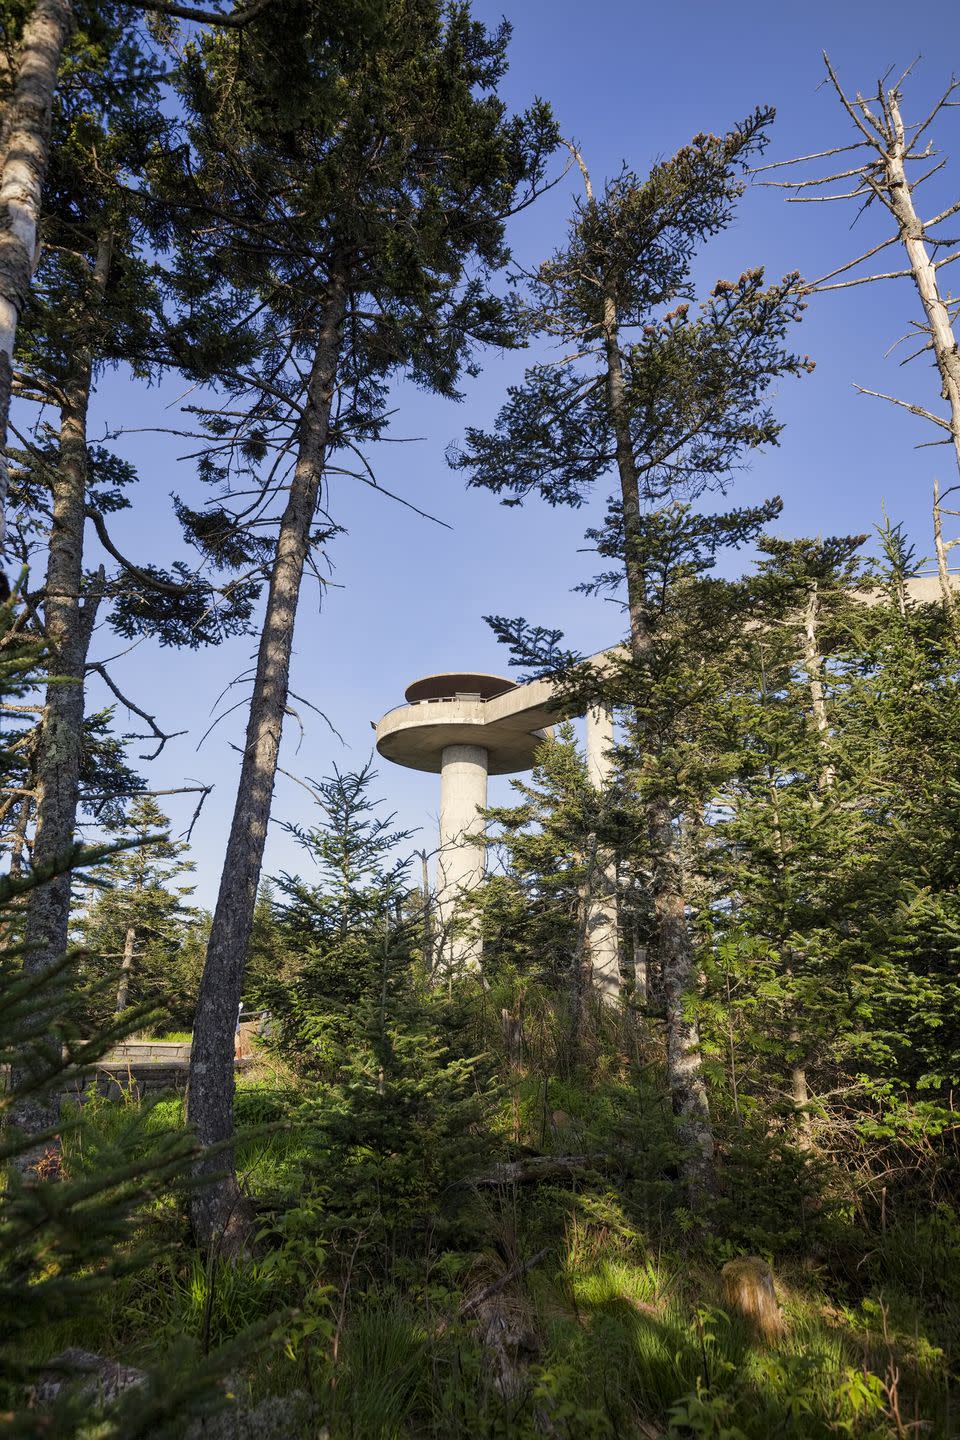 North Carolina: Clingmans Dome Observation Tower Trail